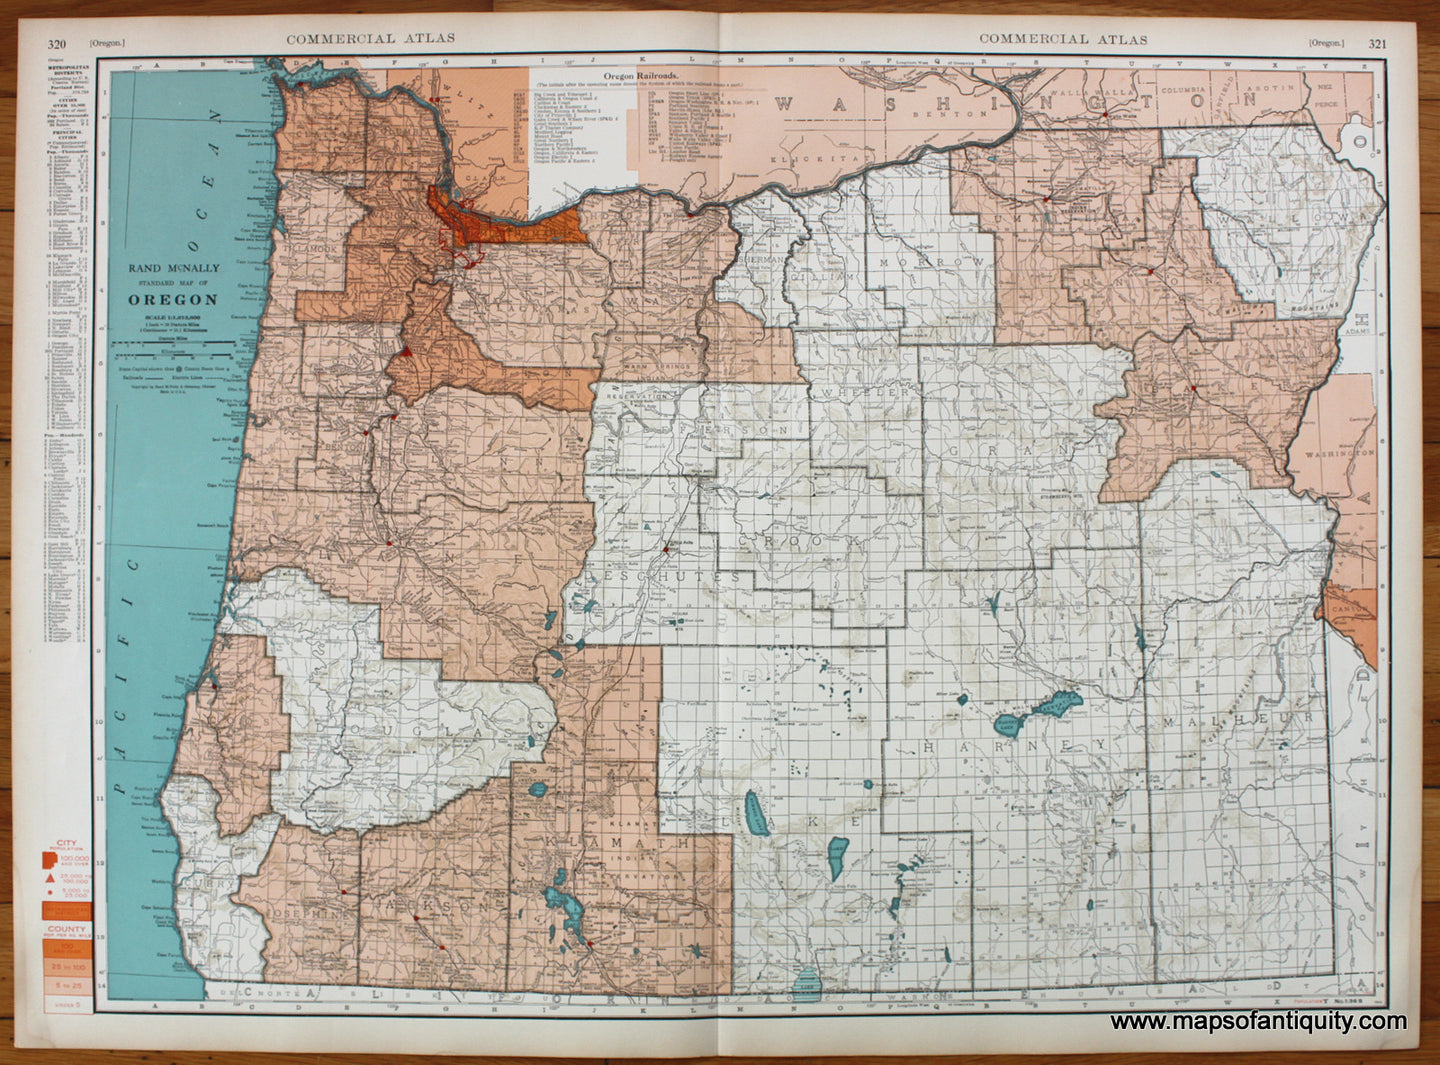 Antique-Printed-Color-Map-Rand-McNally-Standard-Map-of-Oregon-United-States-West-1934-Rand-McNally-Maps-Of-Antiquity